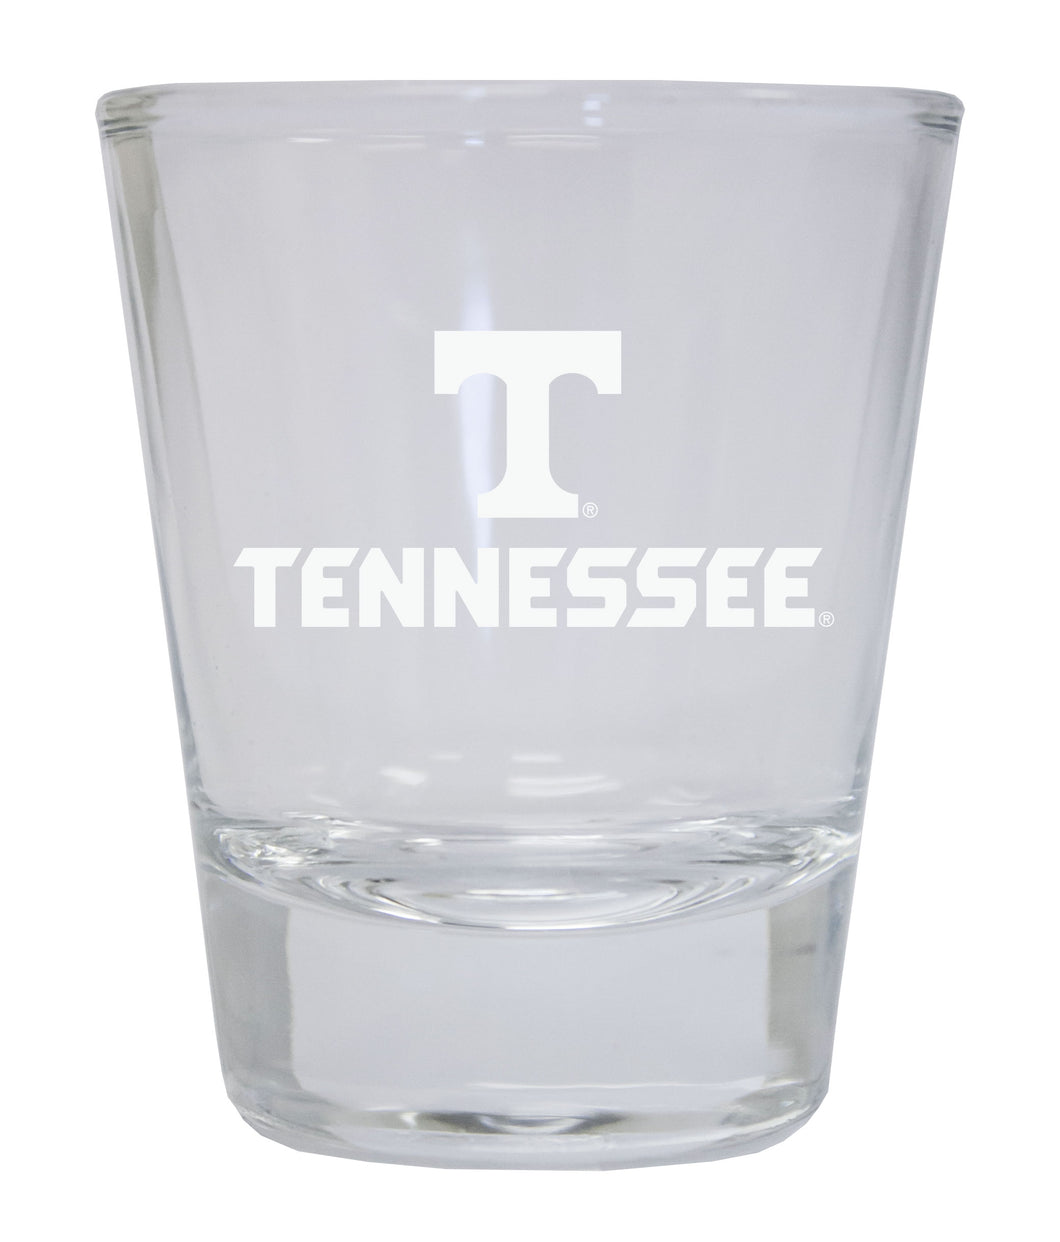 Tennessee Knoxville Etched Round Shot Glass Officially Licensed Collegiate Product